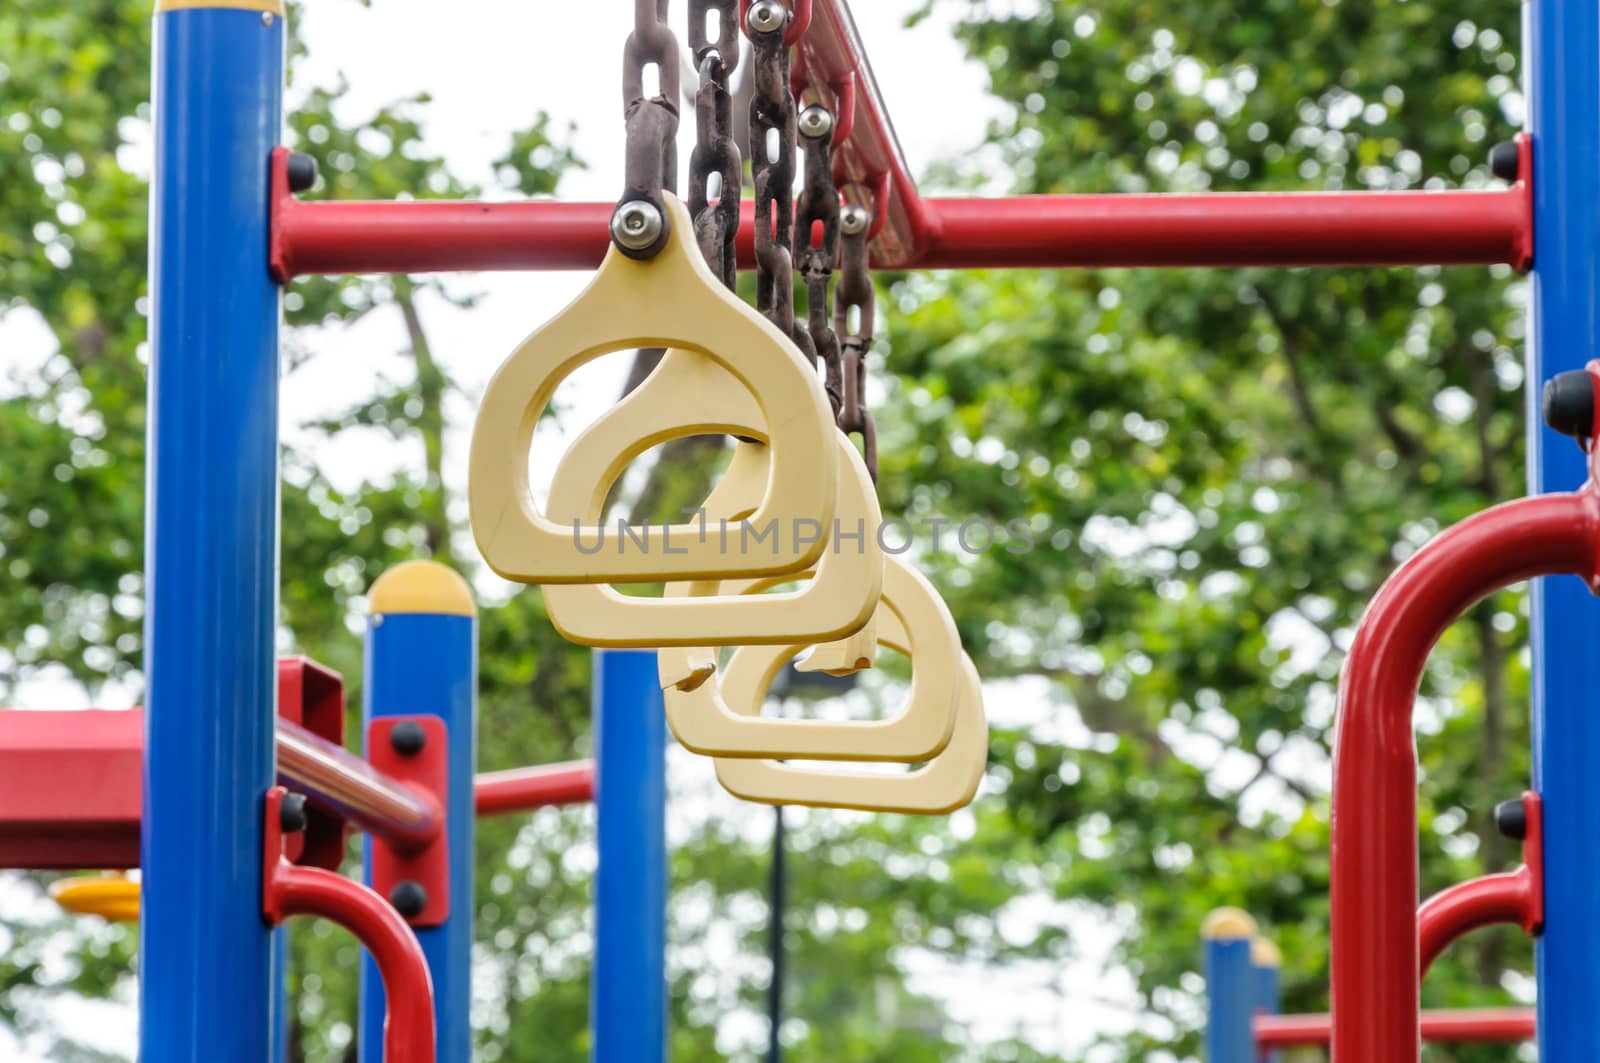 Climbing rings at a playground in the public park